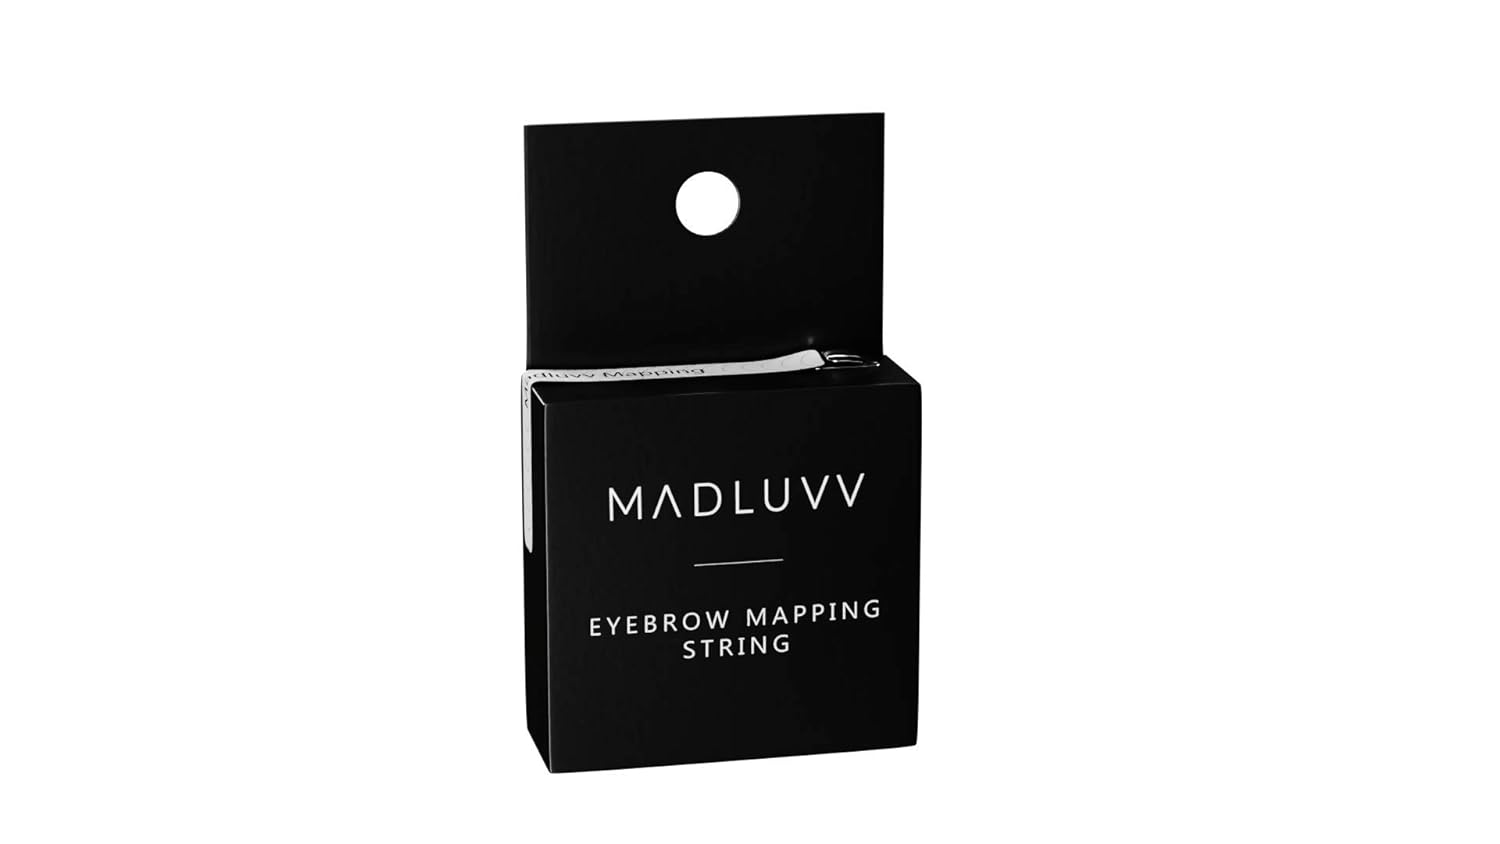 Best Brow Mapping Pre- Inked String For Microblading, Hypoallergenic/Cruelty Free (1 Box)